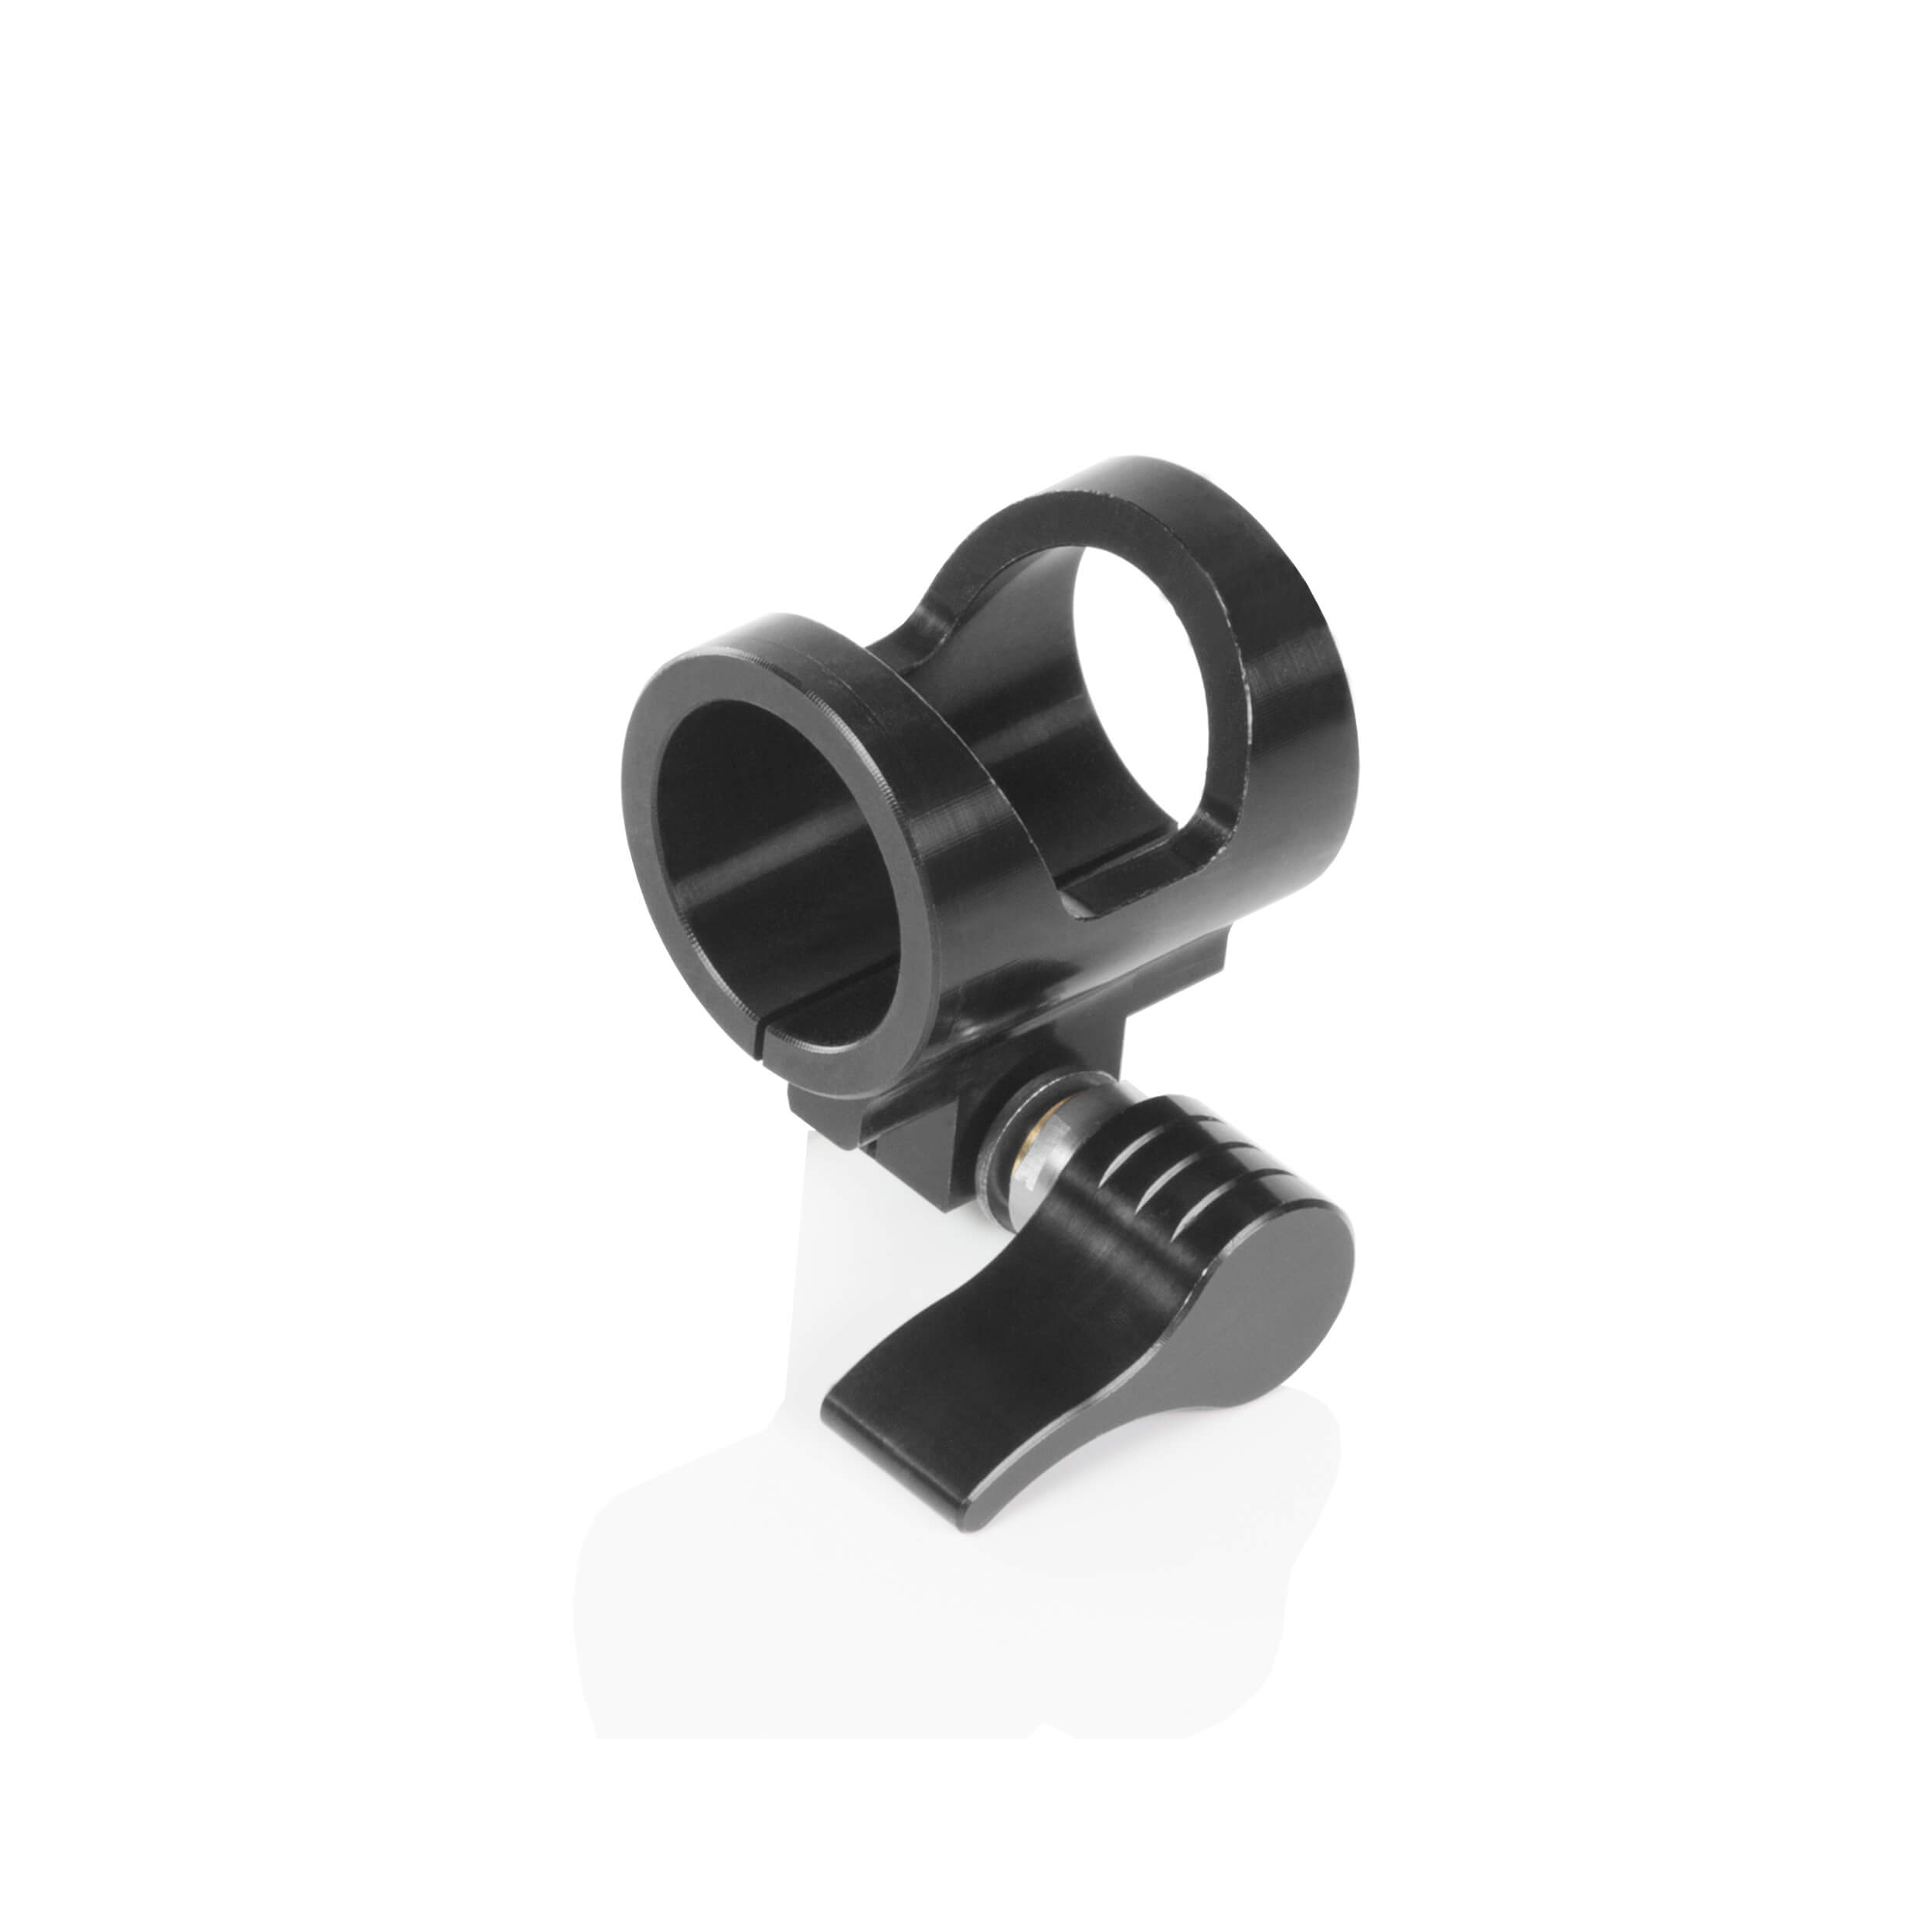 SHAPE 19mm Studio Rod Clamp for Top Plate